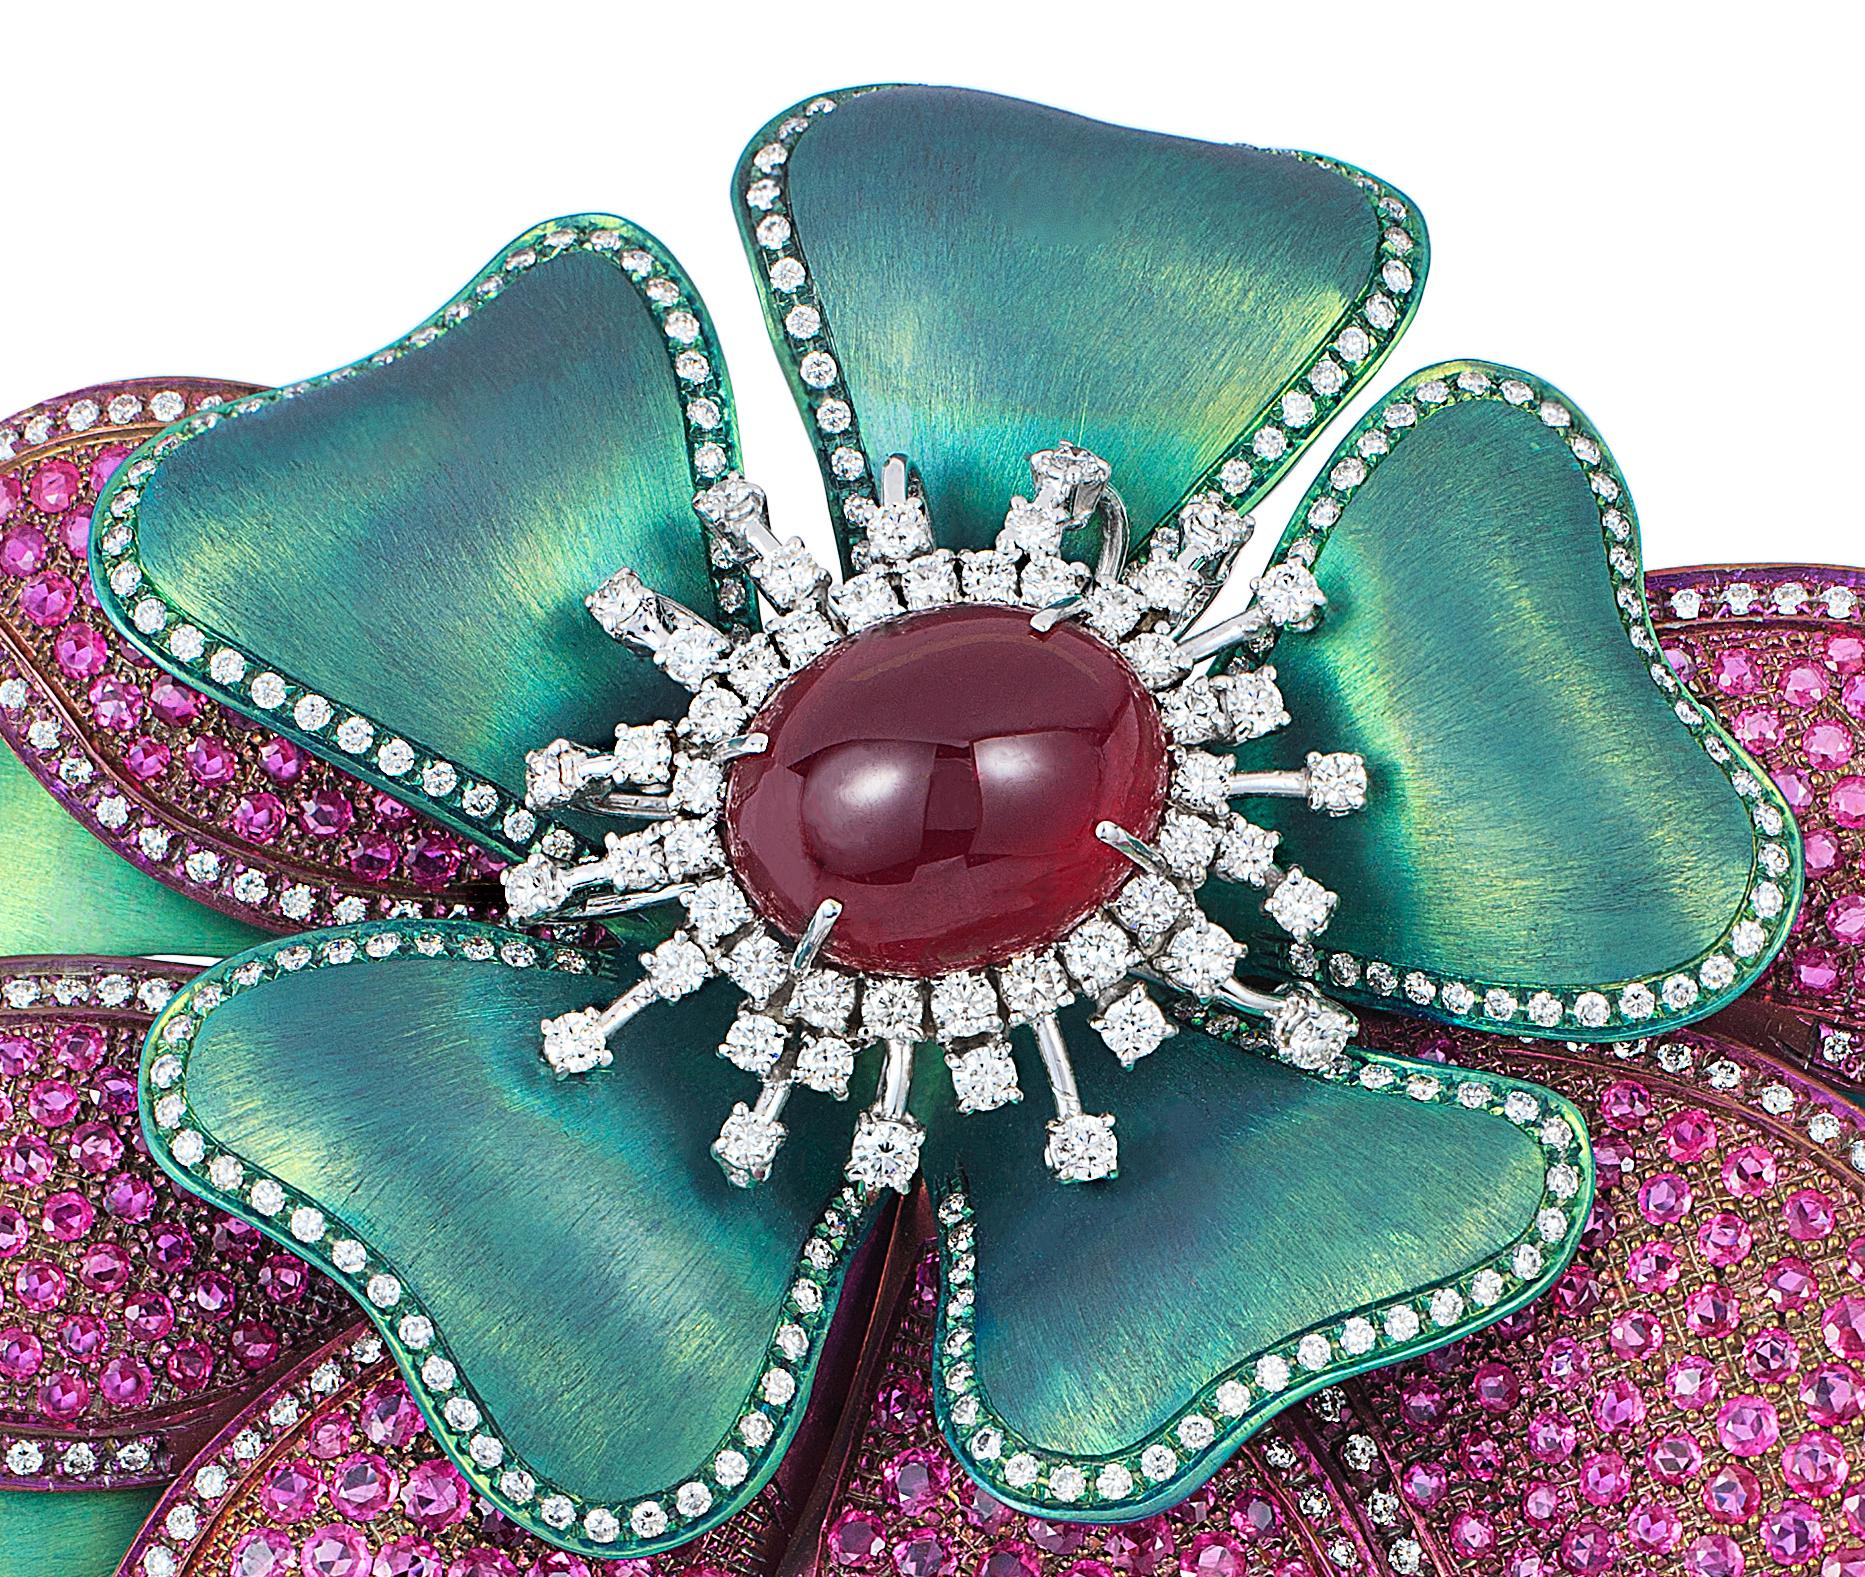 Andreoli Ruby Cabochon Pink Sapphire Diamond Titanium Flower Brooch Pin. Andreoli was one of the first jewelry creators to utilize titanium in high jewelry over 18KT or Platinum. The use of titanium allows for bigger and bolder designs without